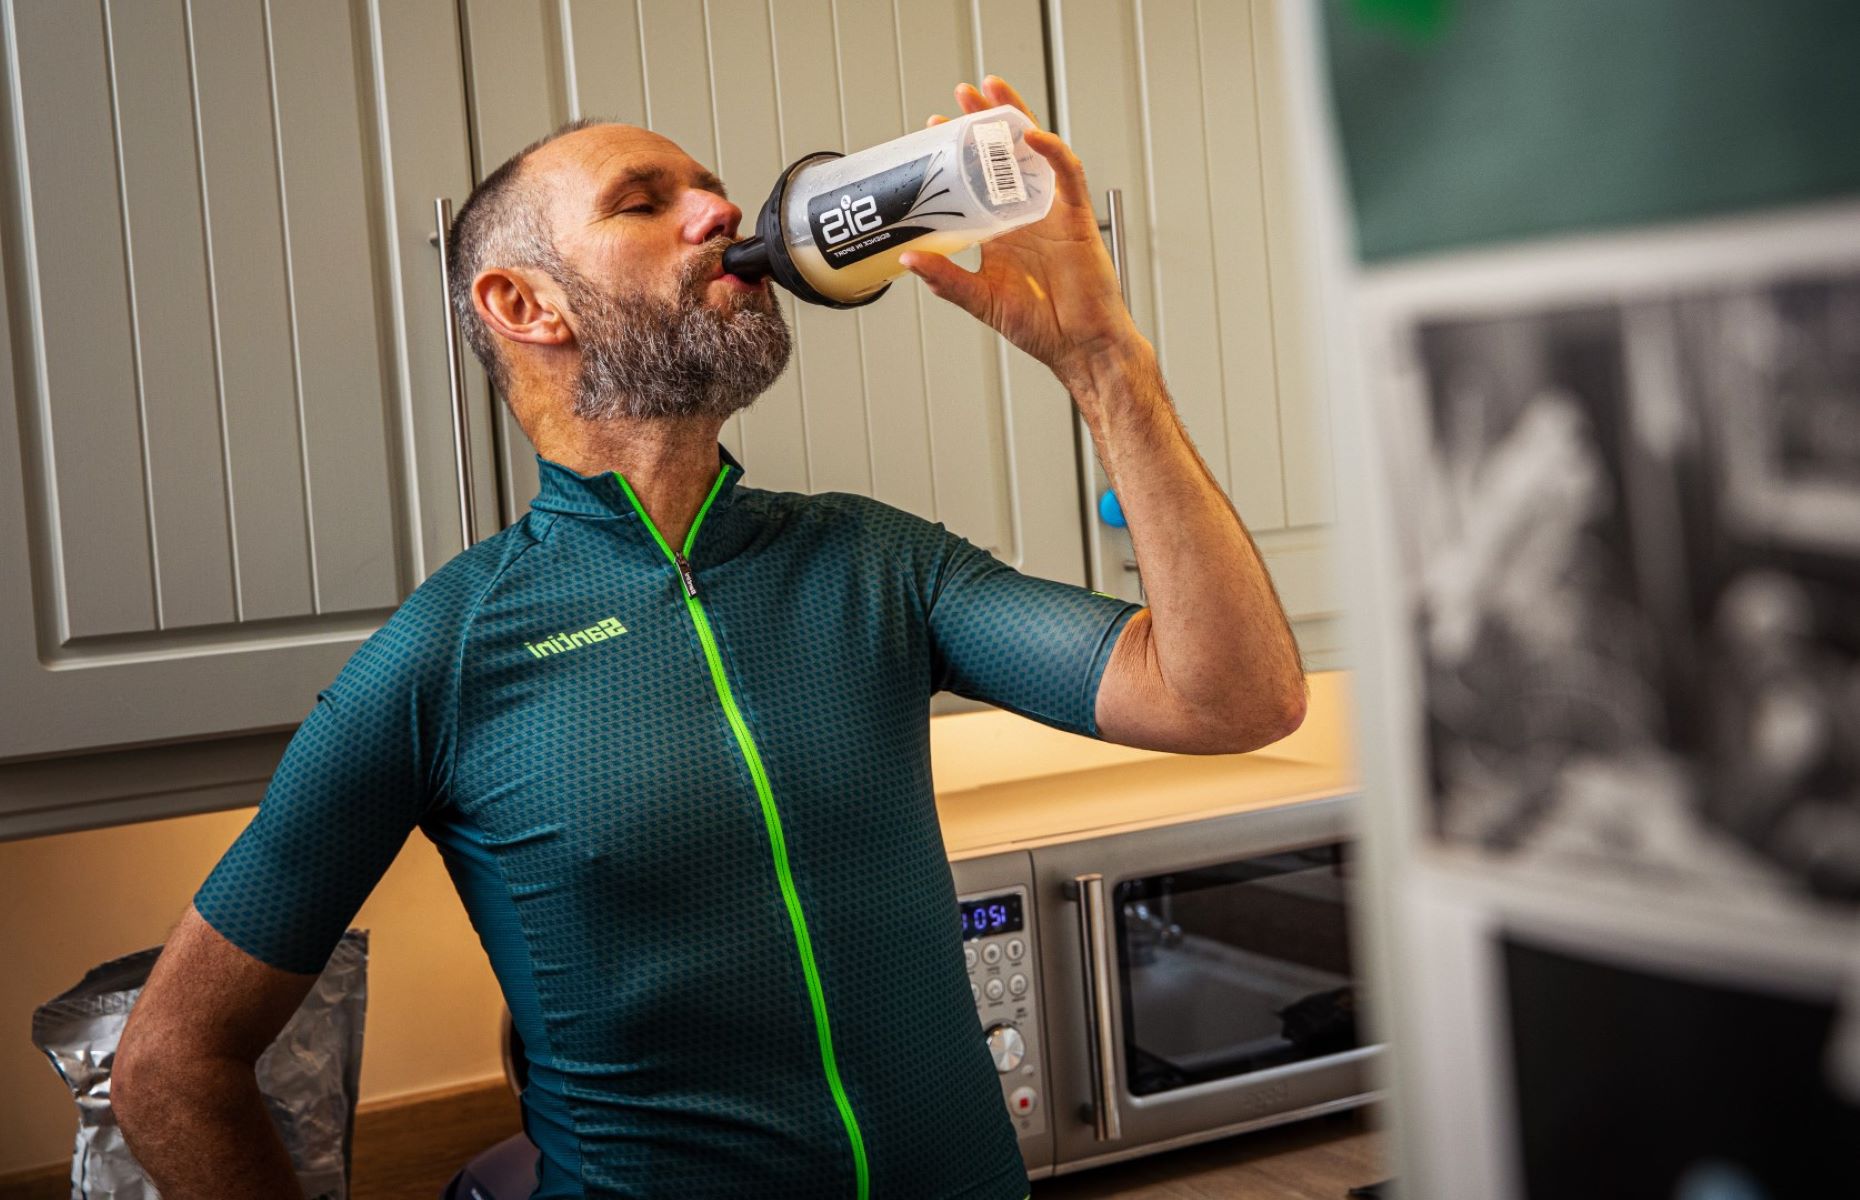 Top Recovery Drinks For Runners In The UK: SiS, Veloforte, And Others